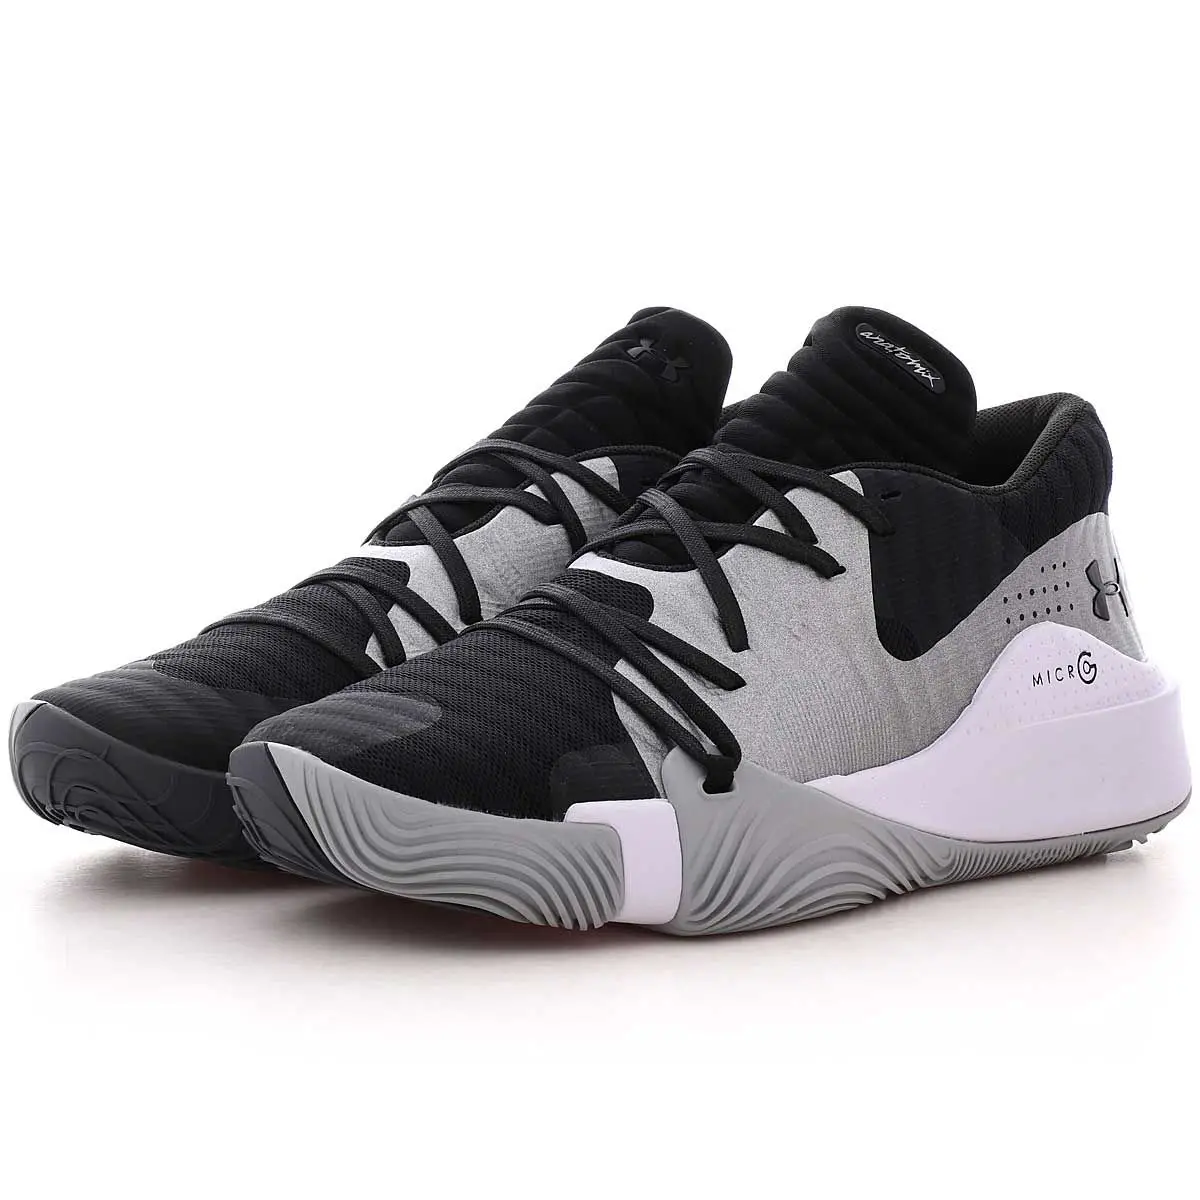 20+ Best Volleyball Shoes 2021 Reviews